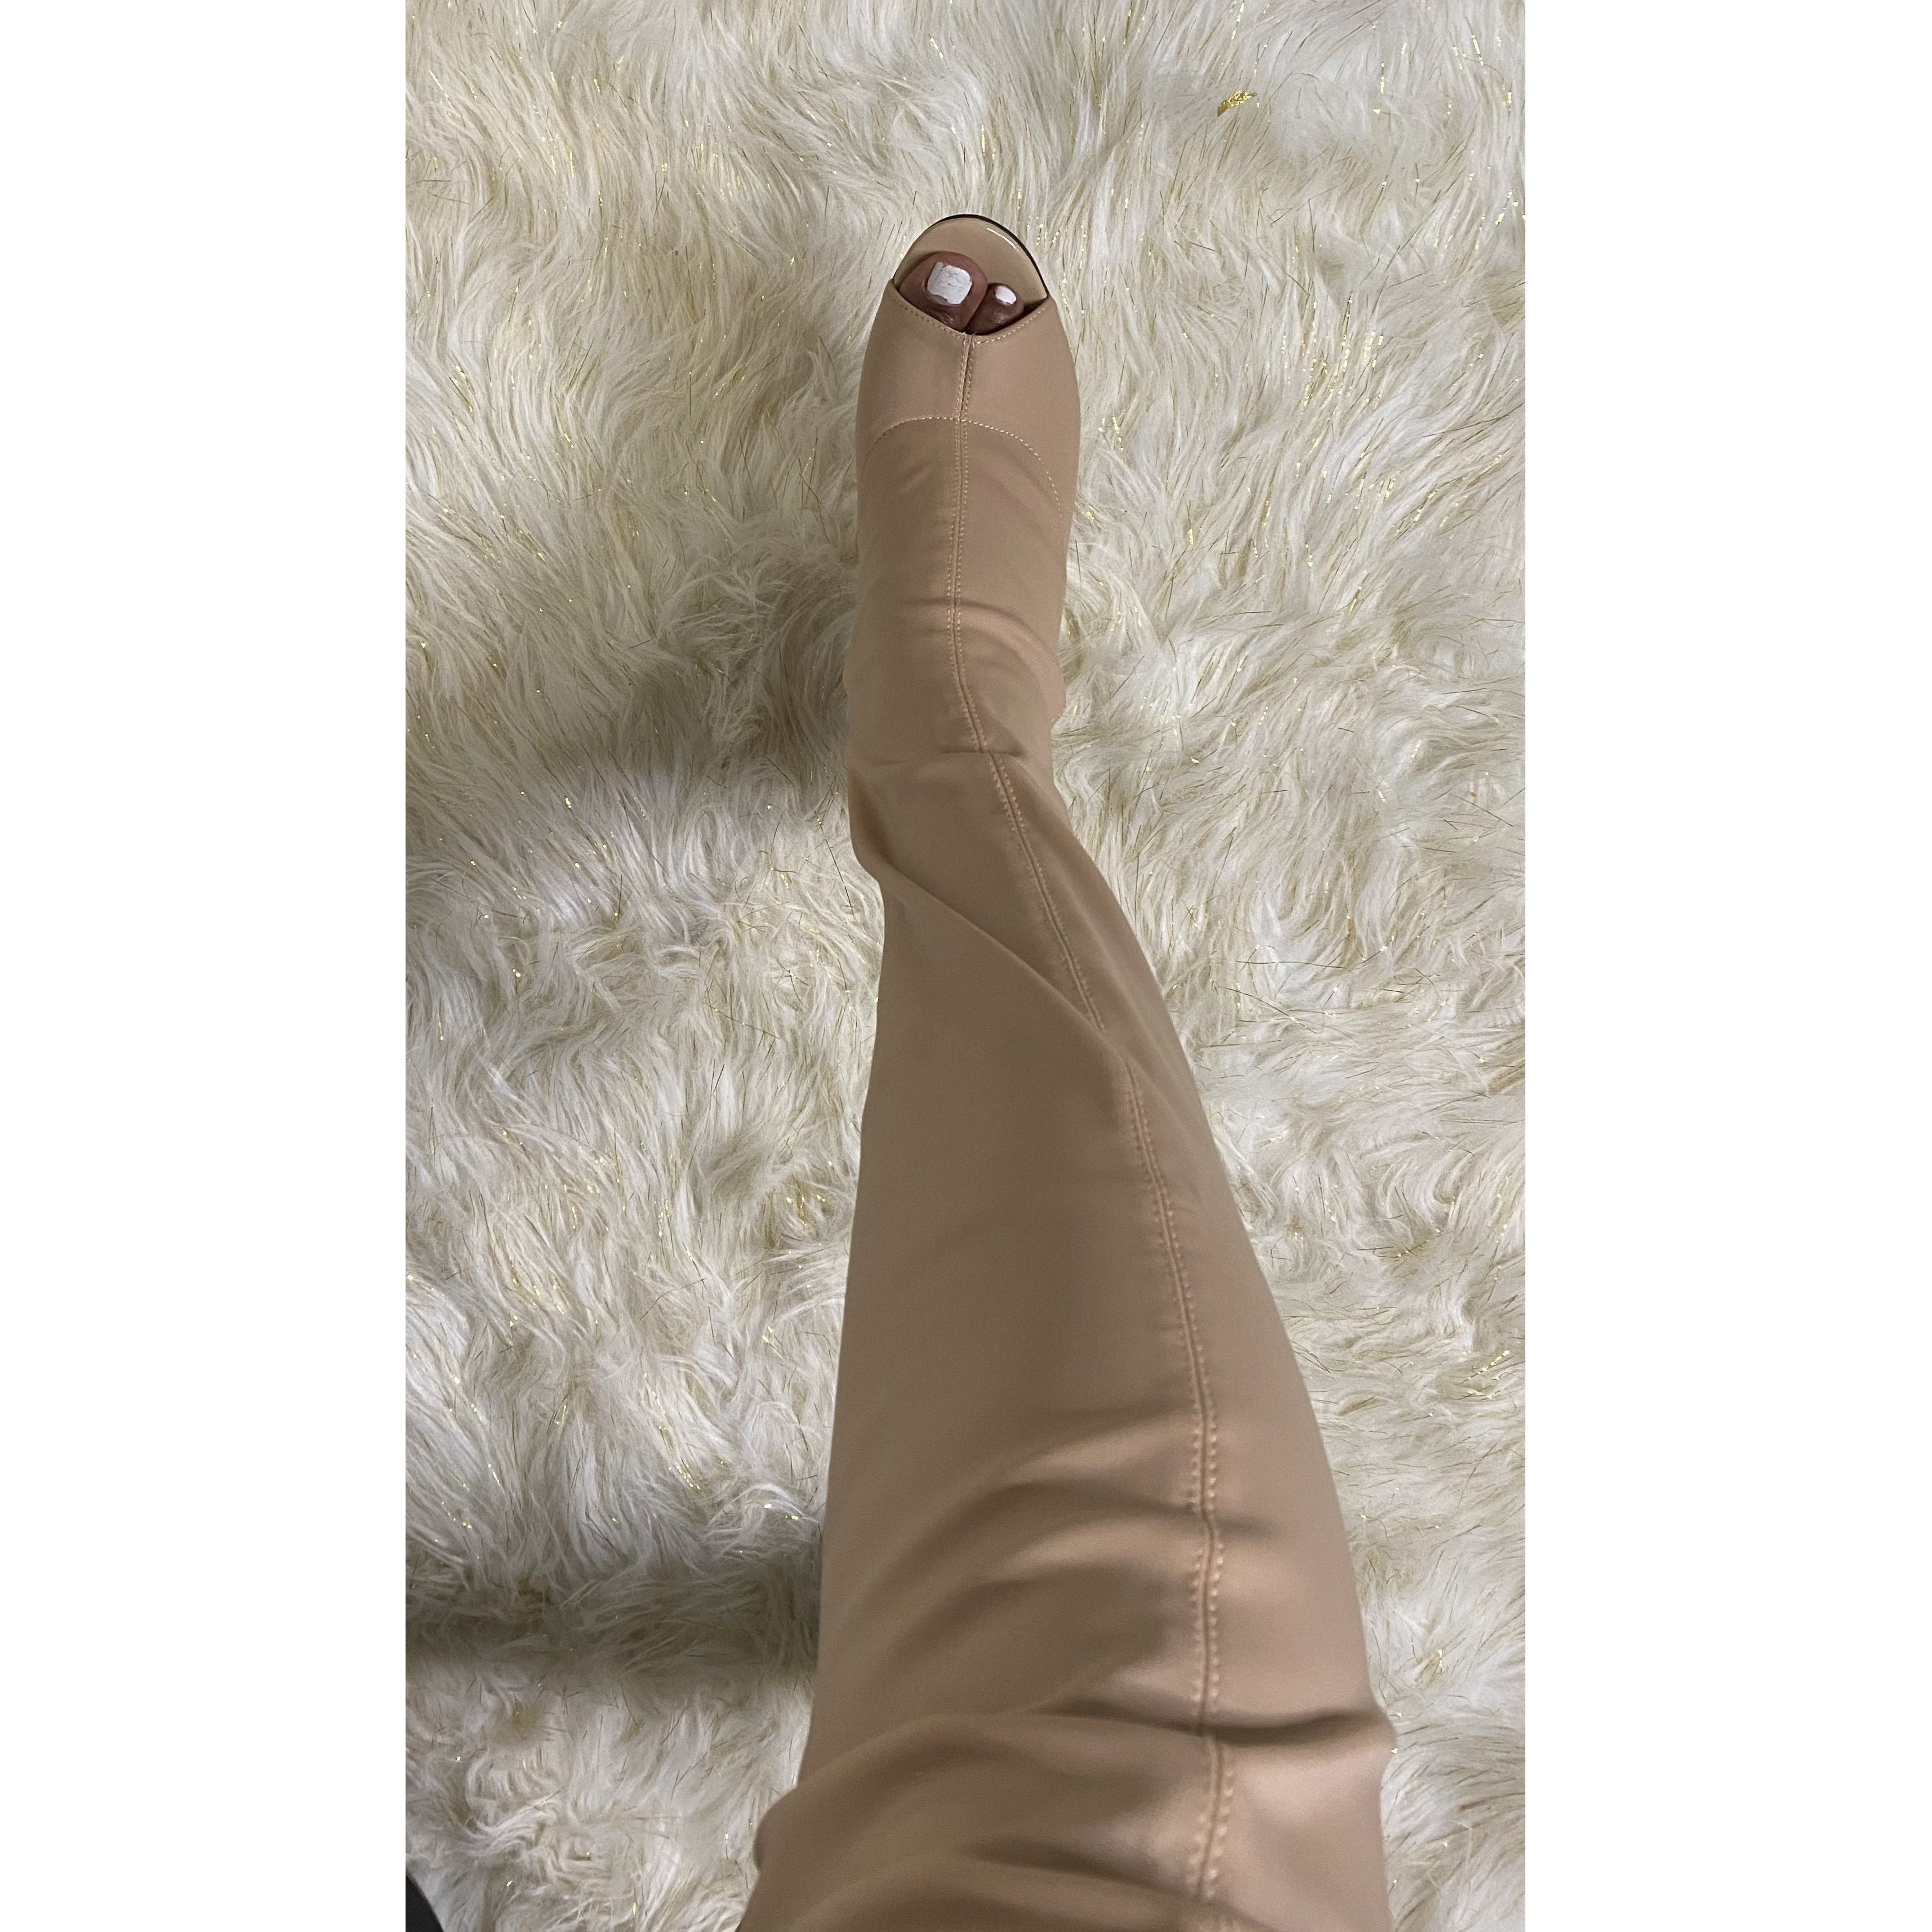 Rosy Brown Peep Toe Block Nude Riding Boots